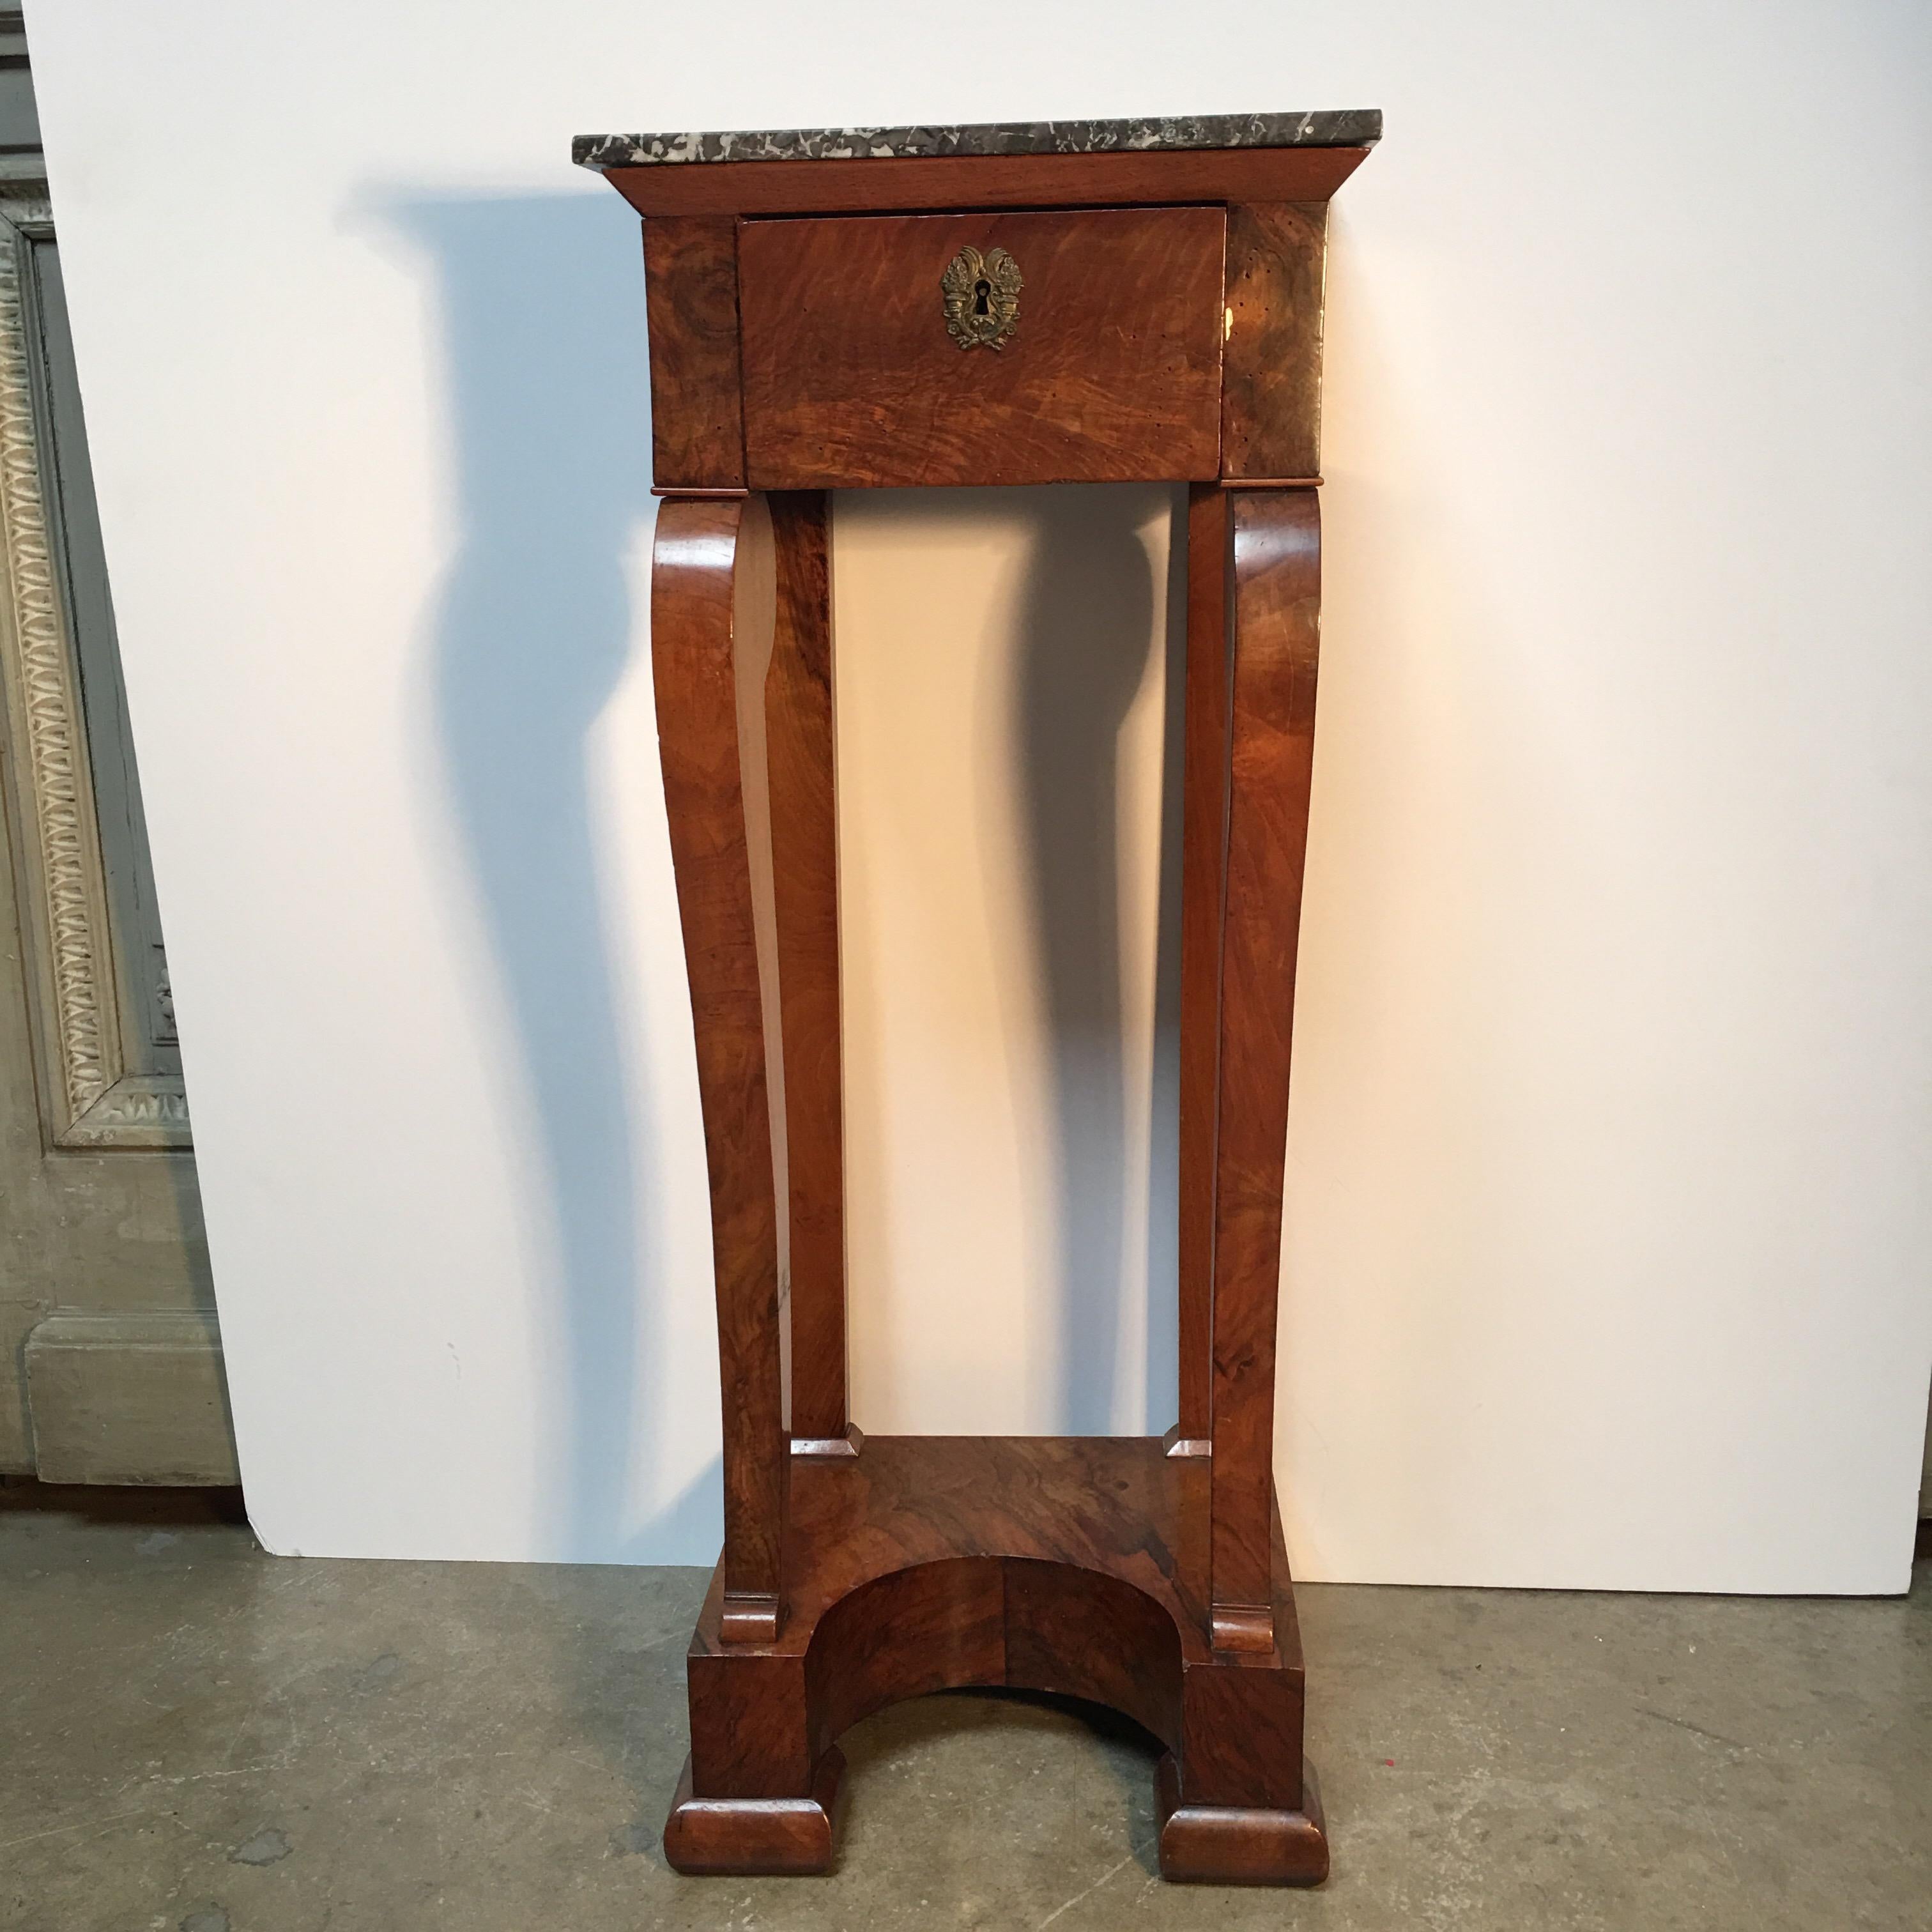 Early 19th century French Charles X mahogany candle stand -side table with marble top.